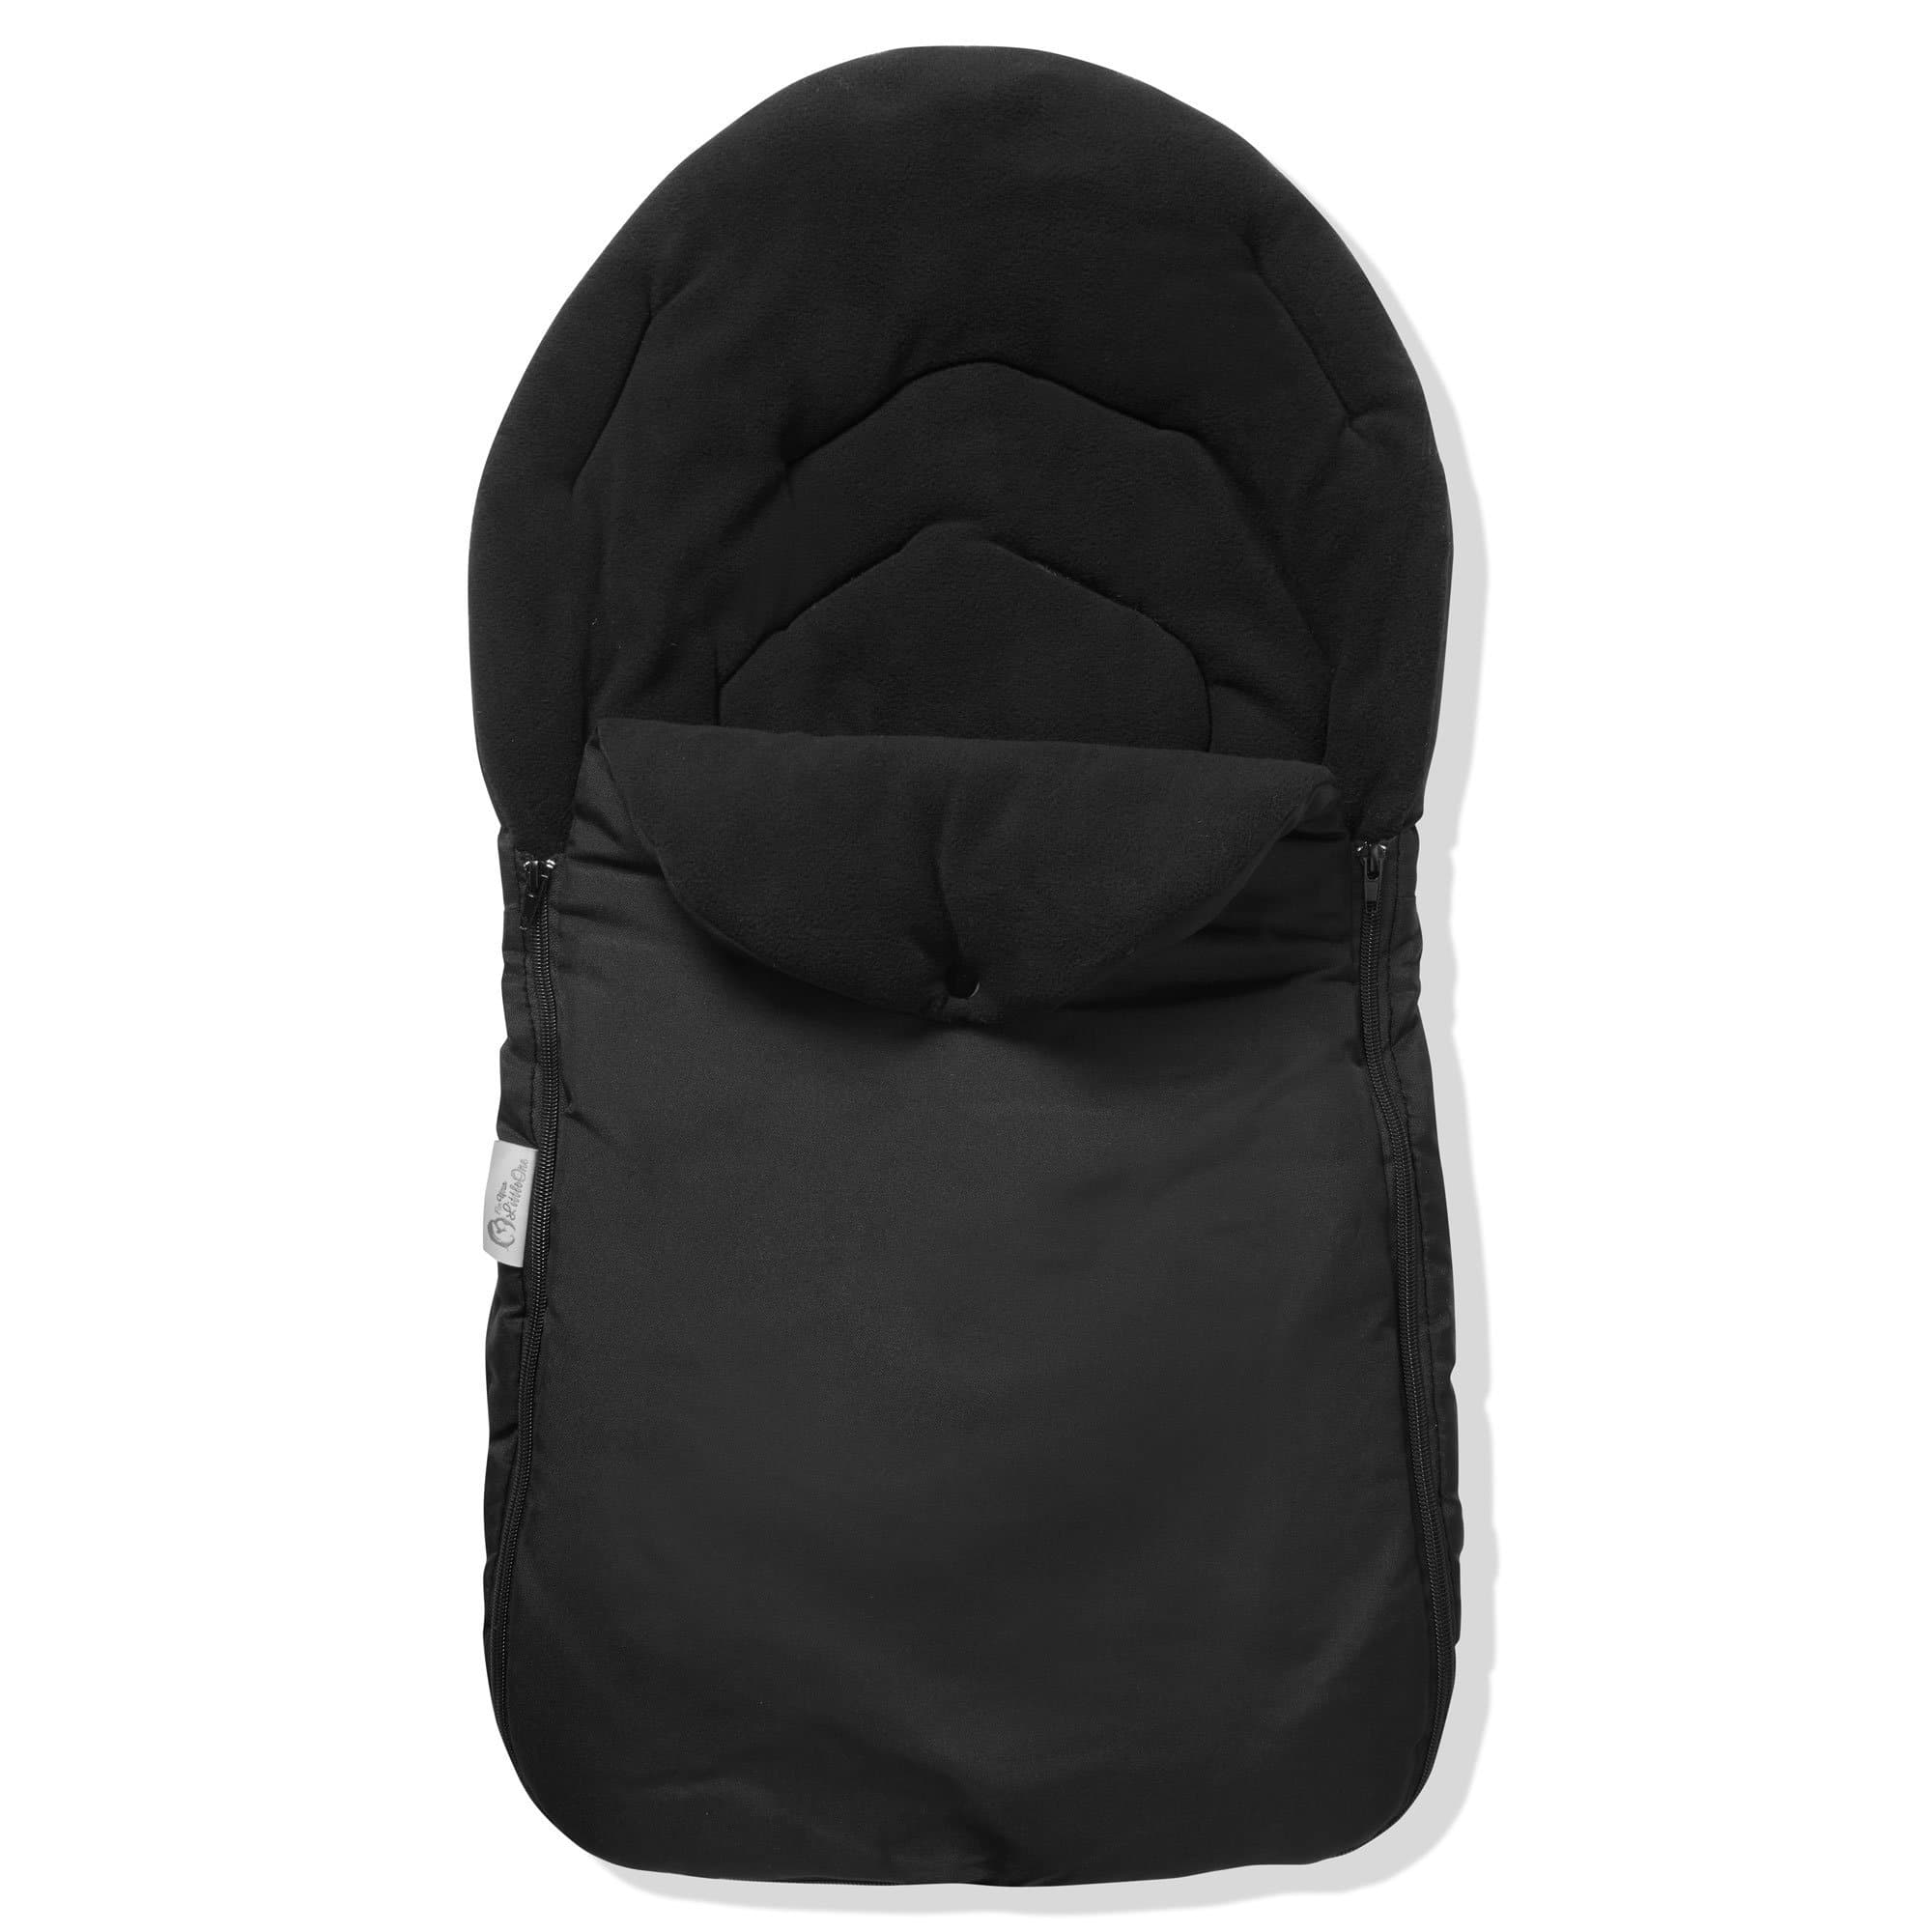 Car Seat Footmuff / Cosy Toes Compatible with Maxi-Cosi - Black / Fits All Models | For Your Little One